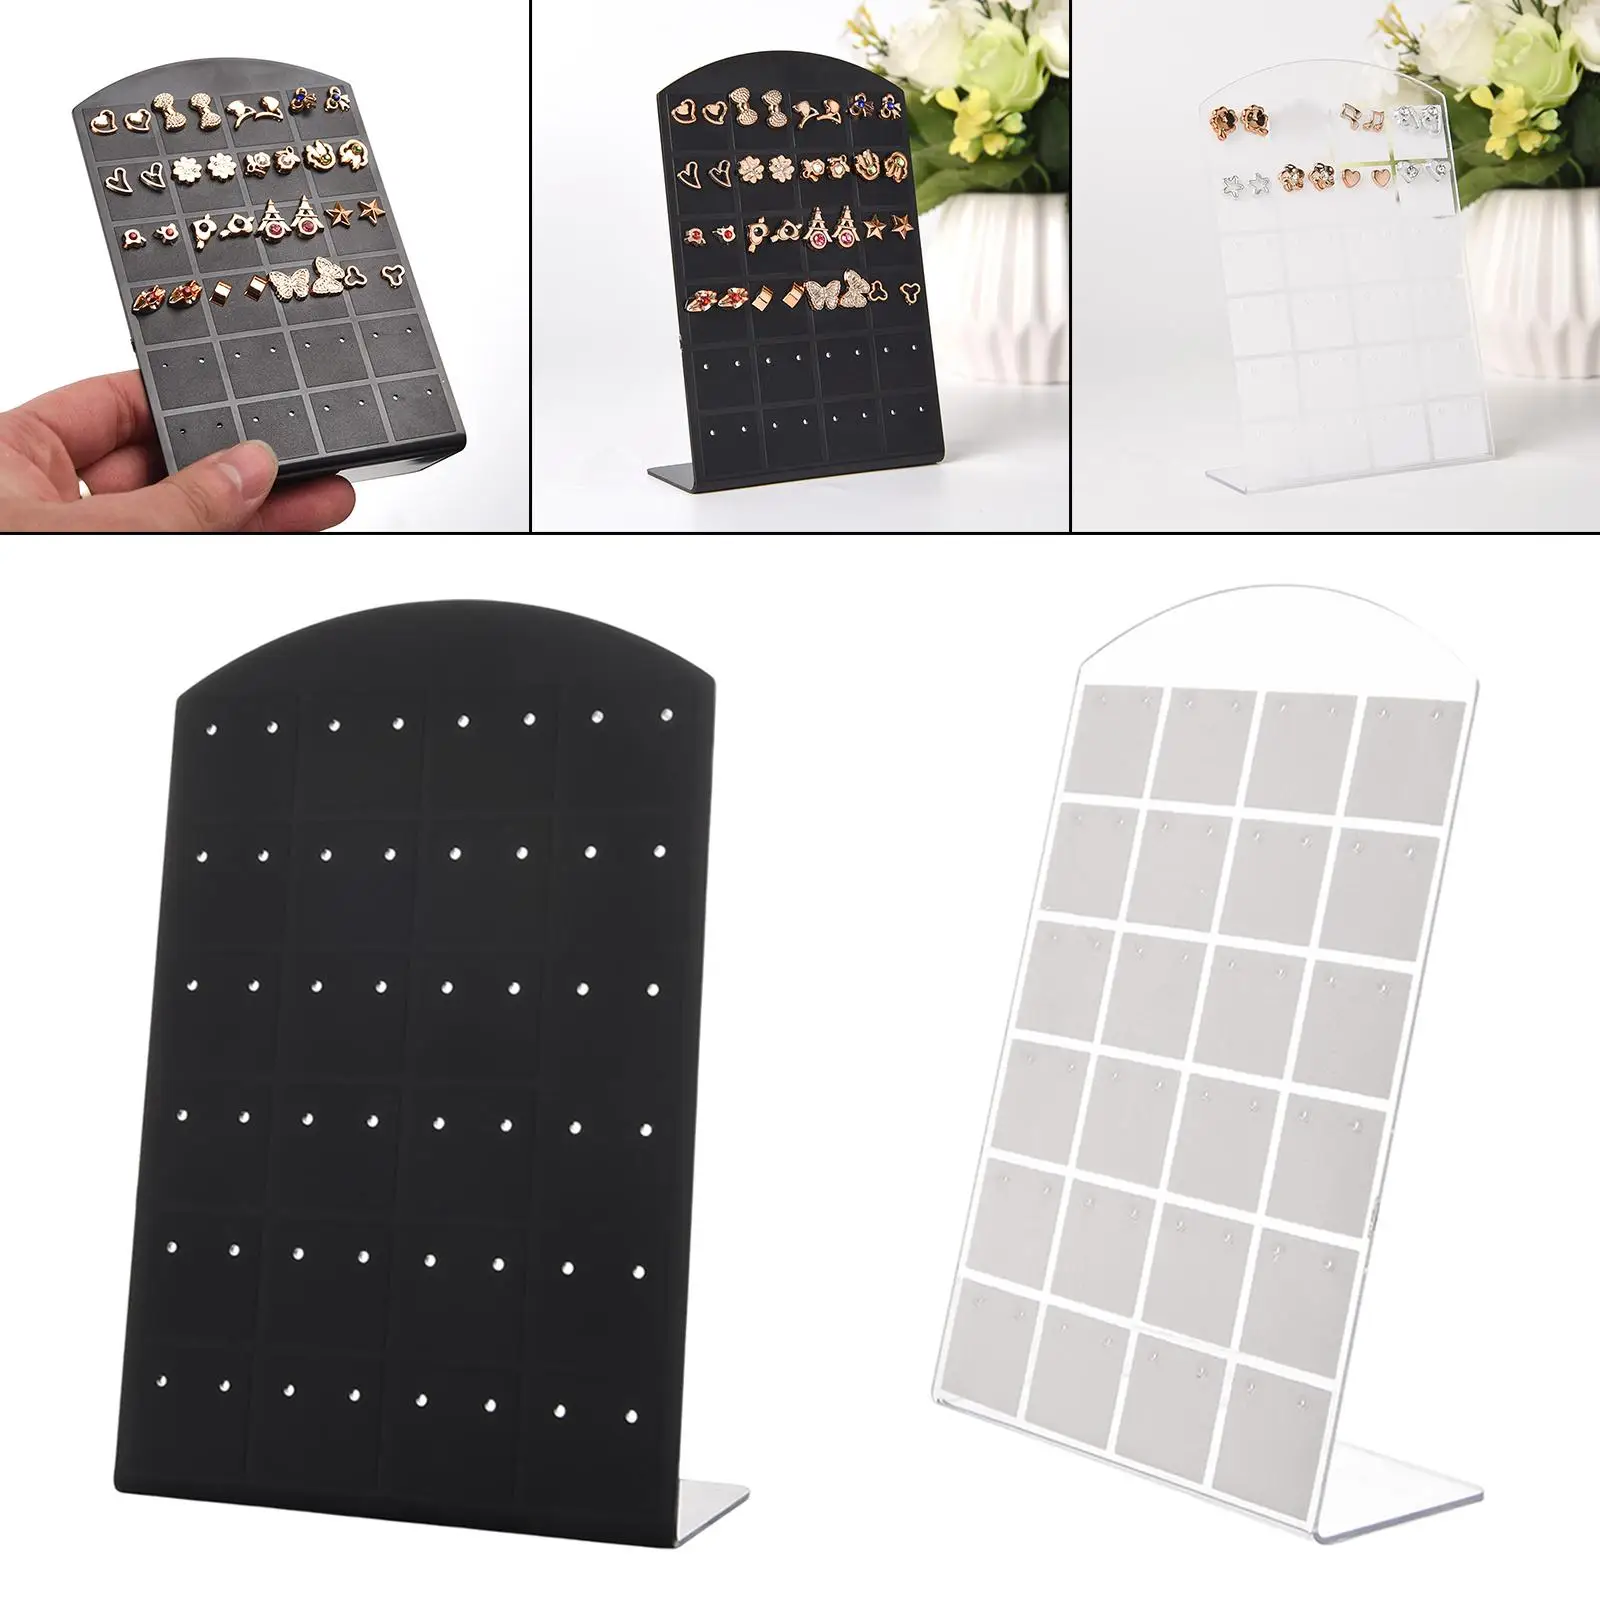 48 Holes Earring Holder Stand L Shape Portable Stud Earrings Display Stand Earring Organizer Ear Stud Storage for Personal